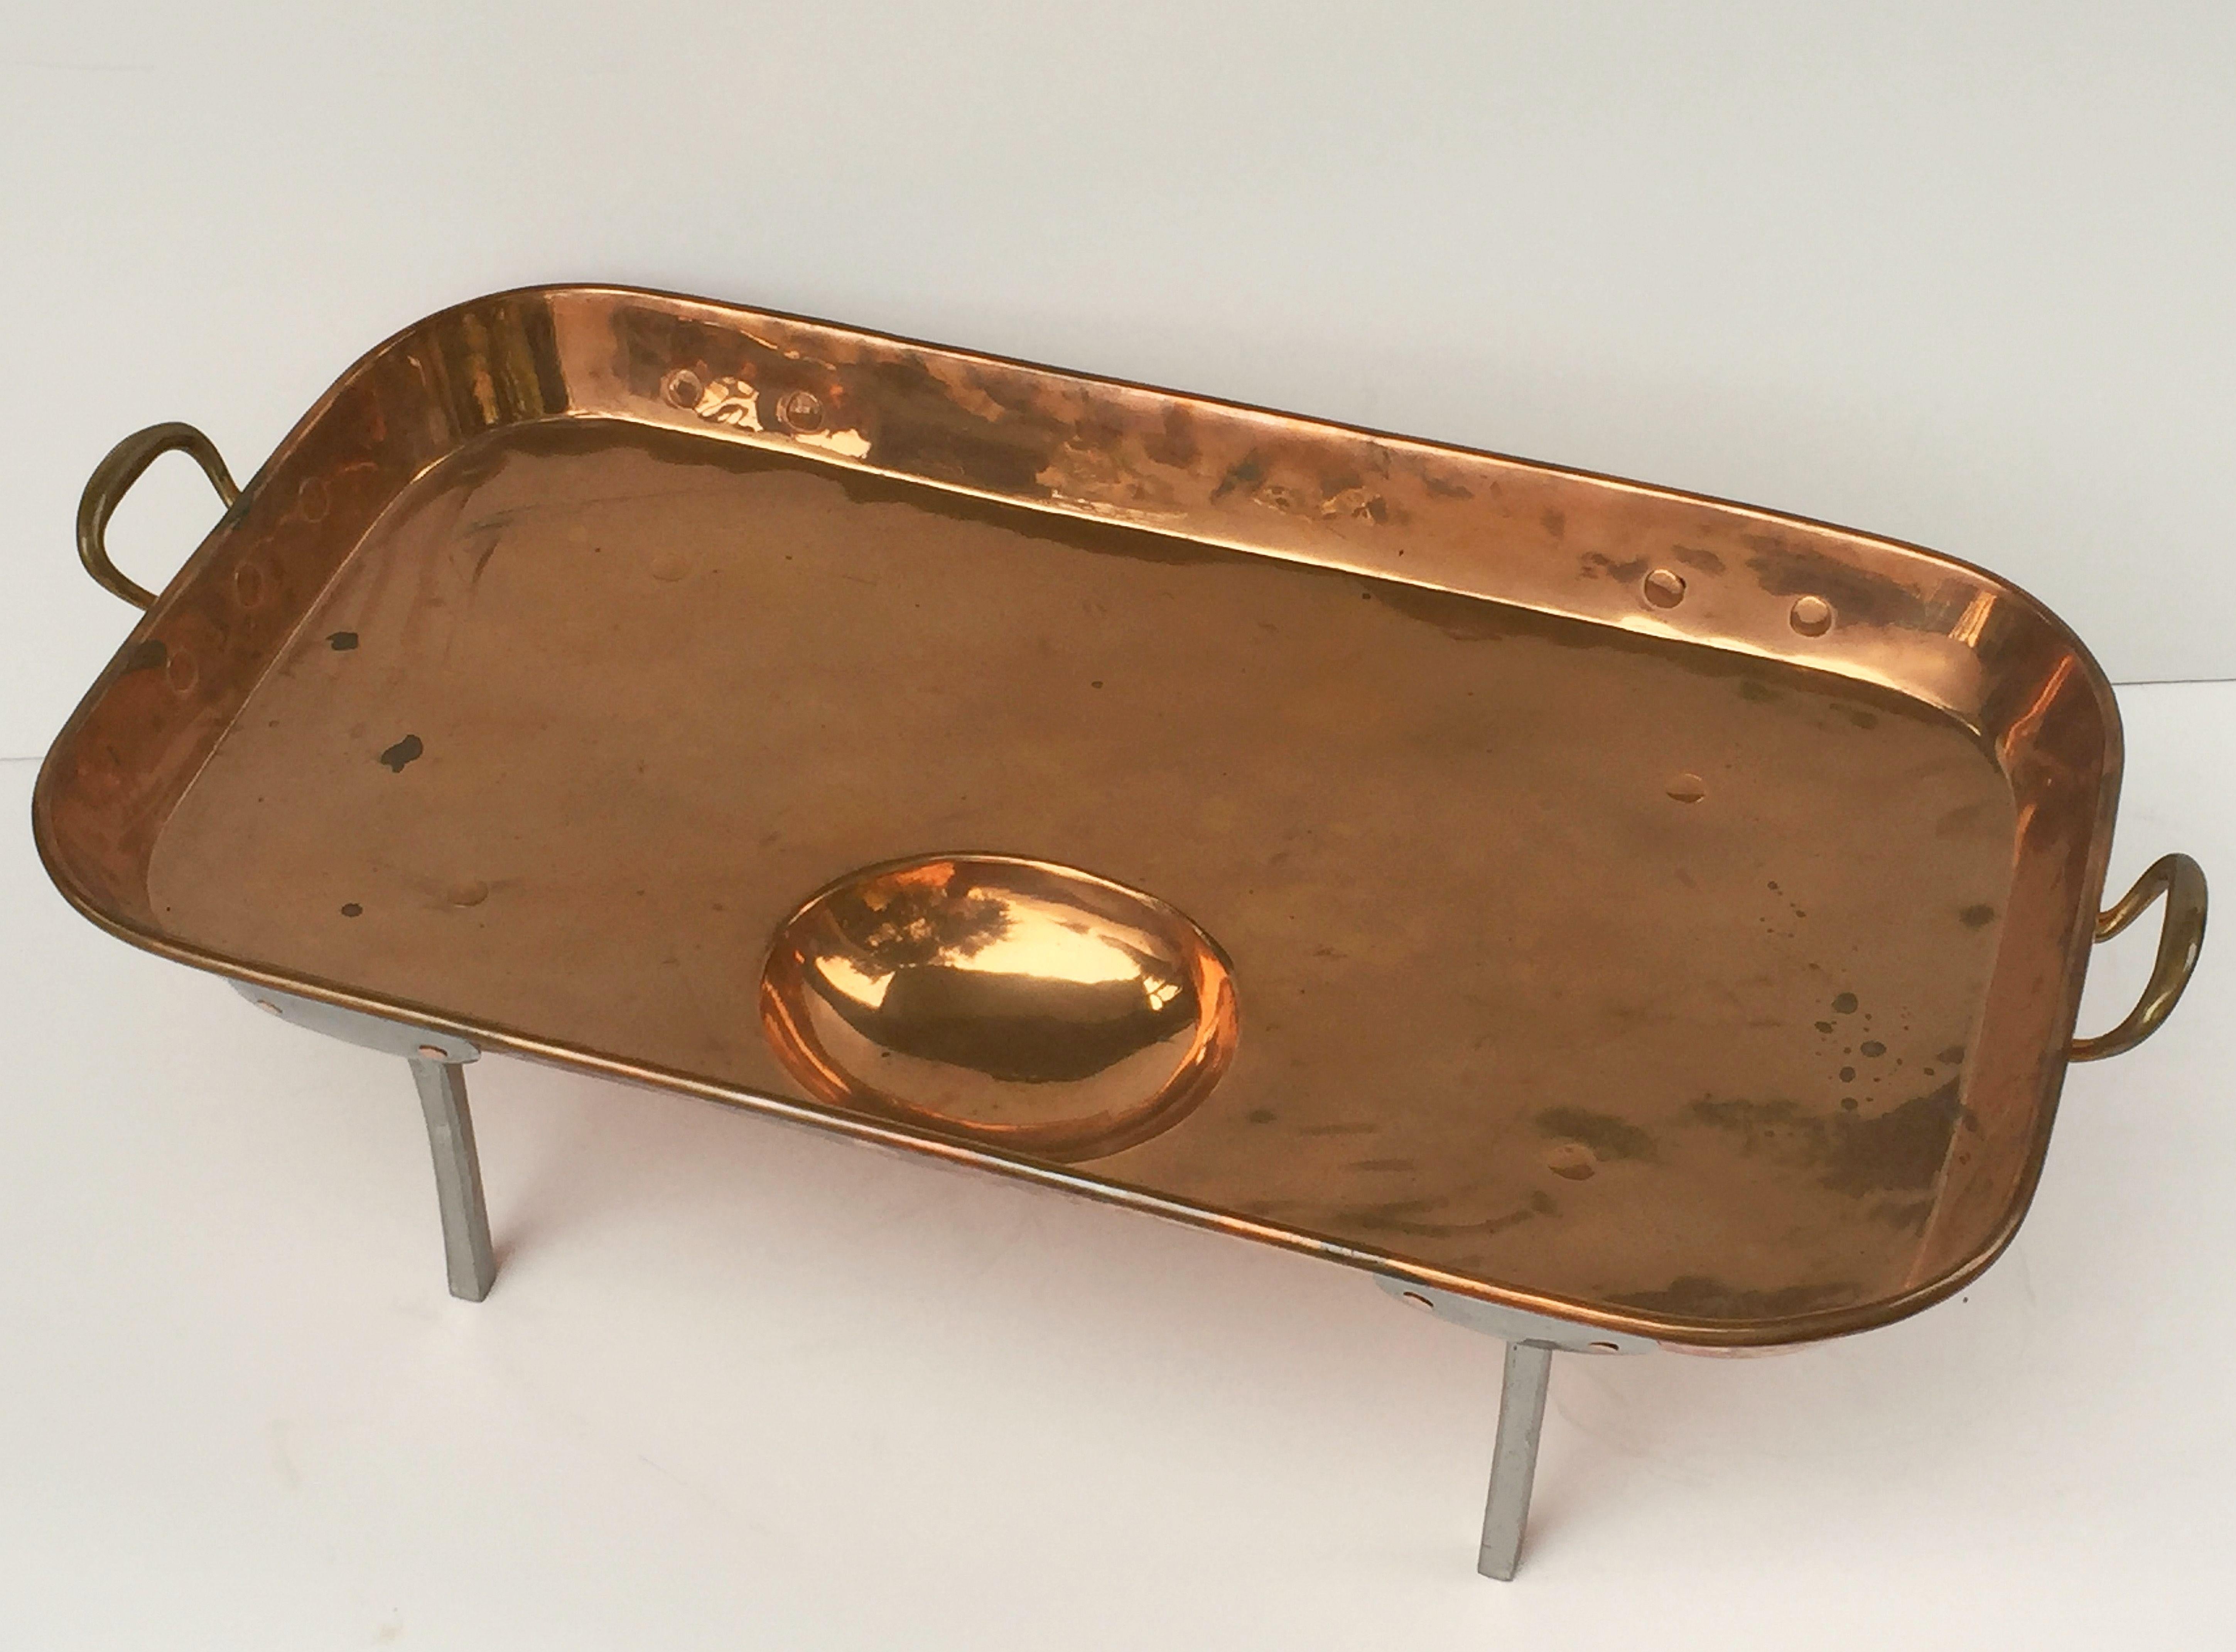 19th Century Large English Rectangular Copper Serving Tray or Platter on Steel Feet